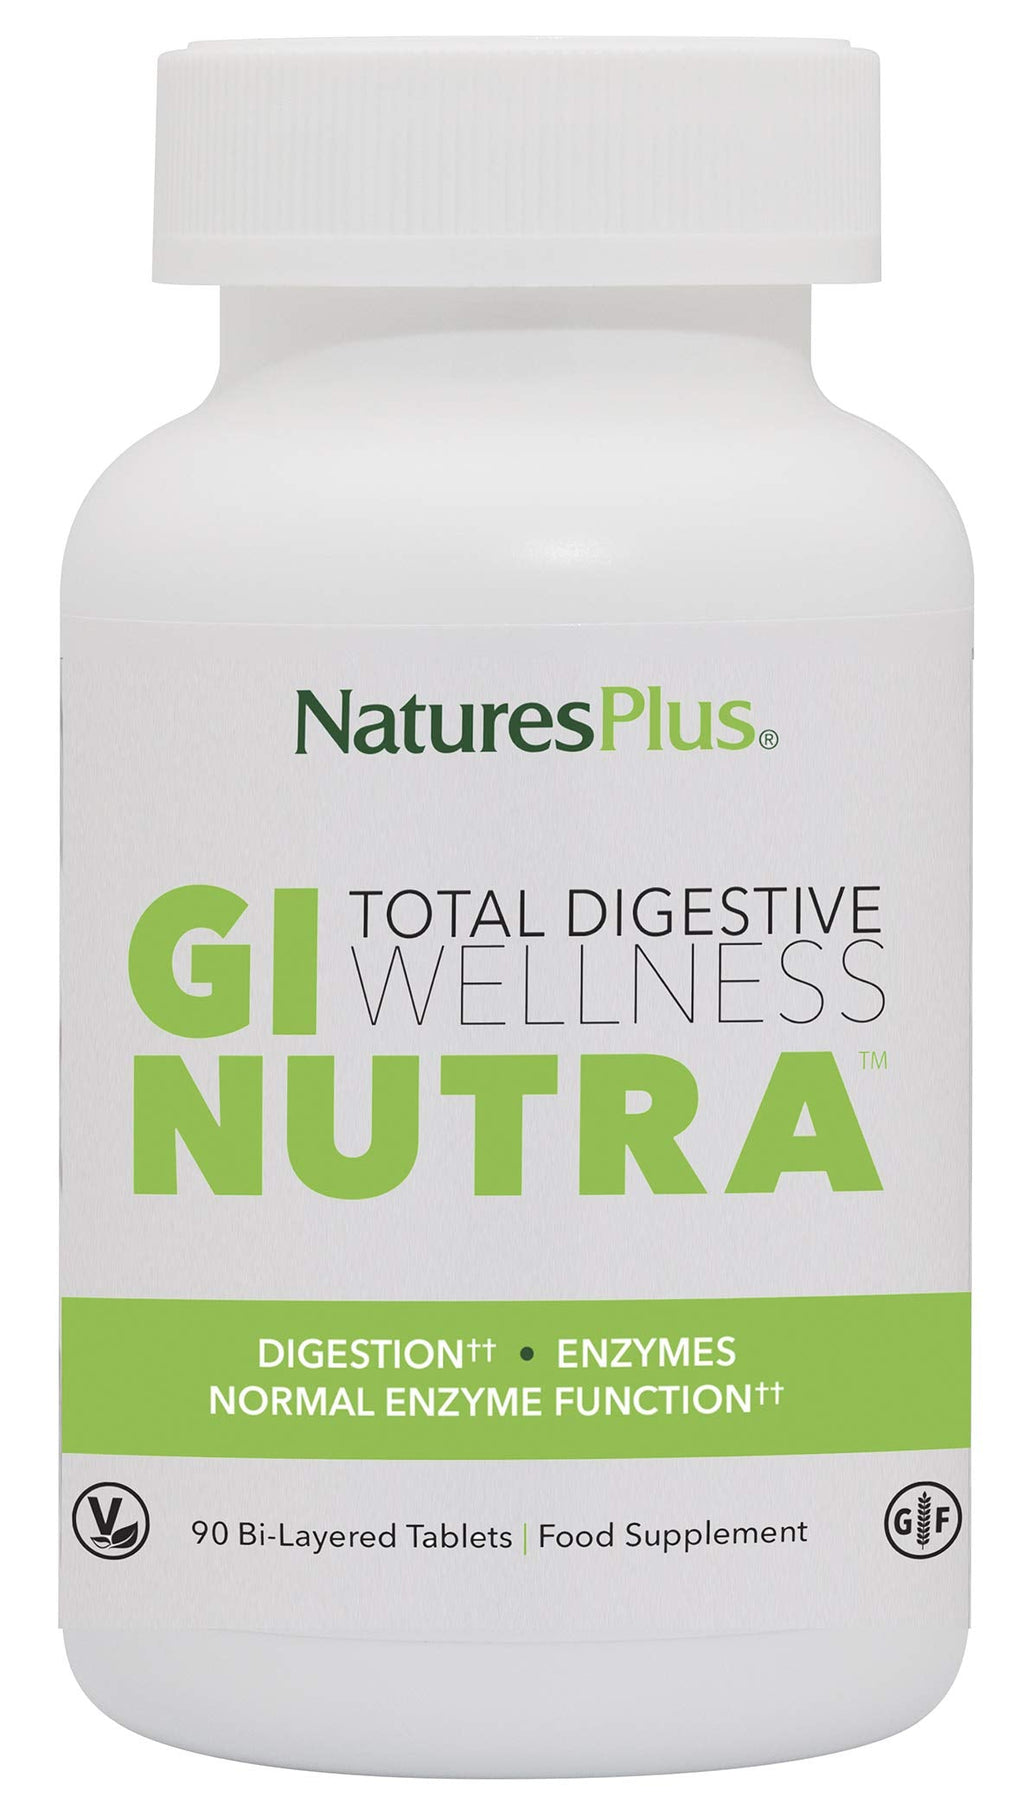 NaturesPlus GI Nutra Total Digestive Wellness - Natural Probiotics Supplement with Prebiotics, Digestive Enzymes, Calcium and Glutamine for Gut Health - Vegetarian, Gluten Free - 90 Tablets 90 Count (Pack of 1) - BeesActive Australia